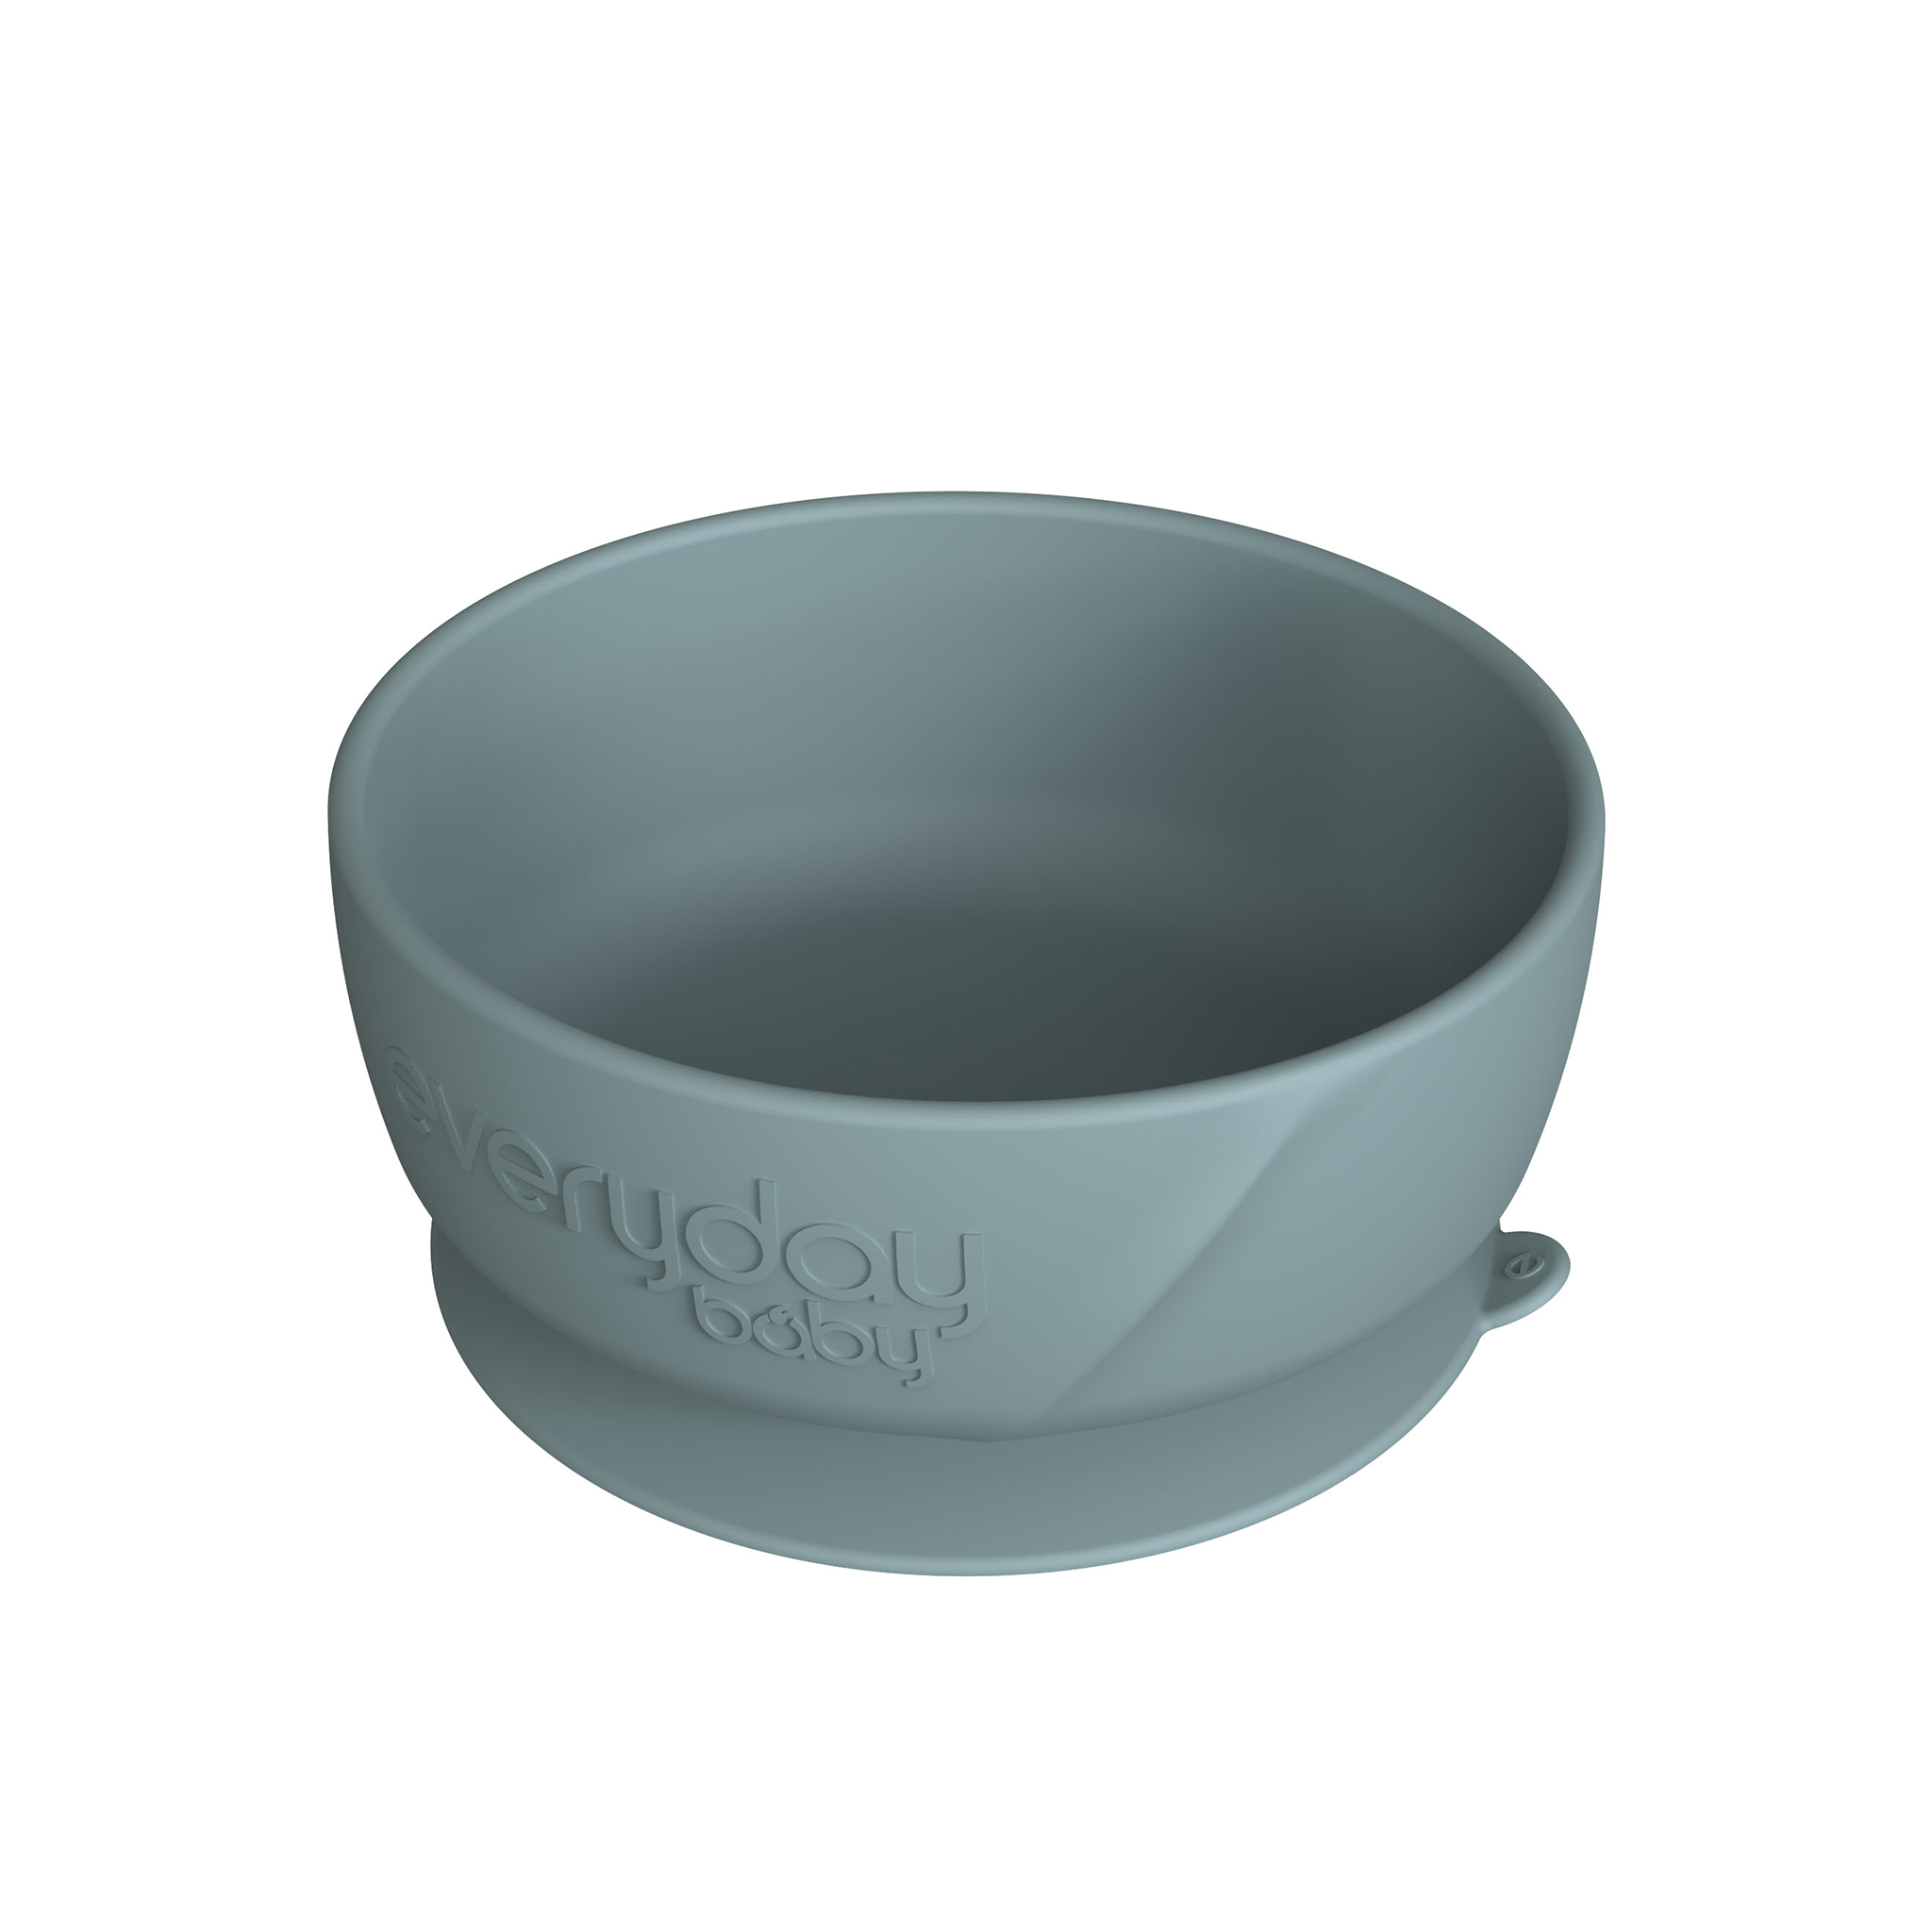 Mushie - Silicone Suction Bowl - Dried Thyme TAX FREE at Posh Baby